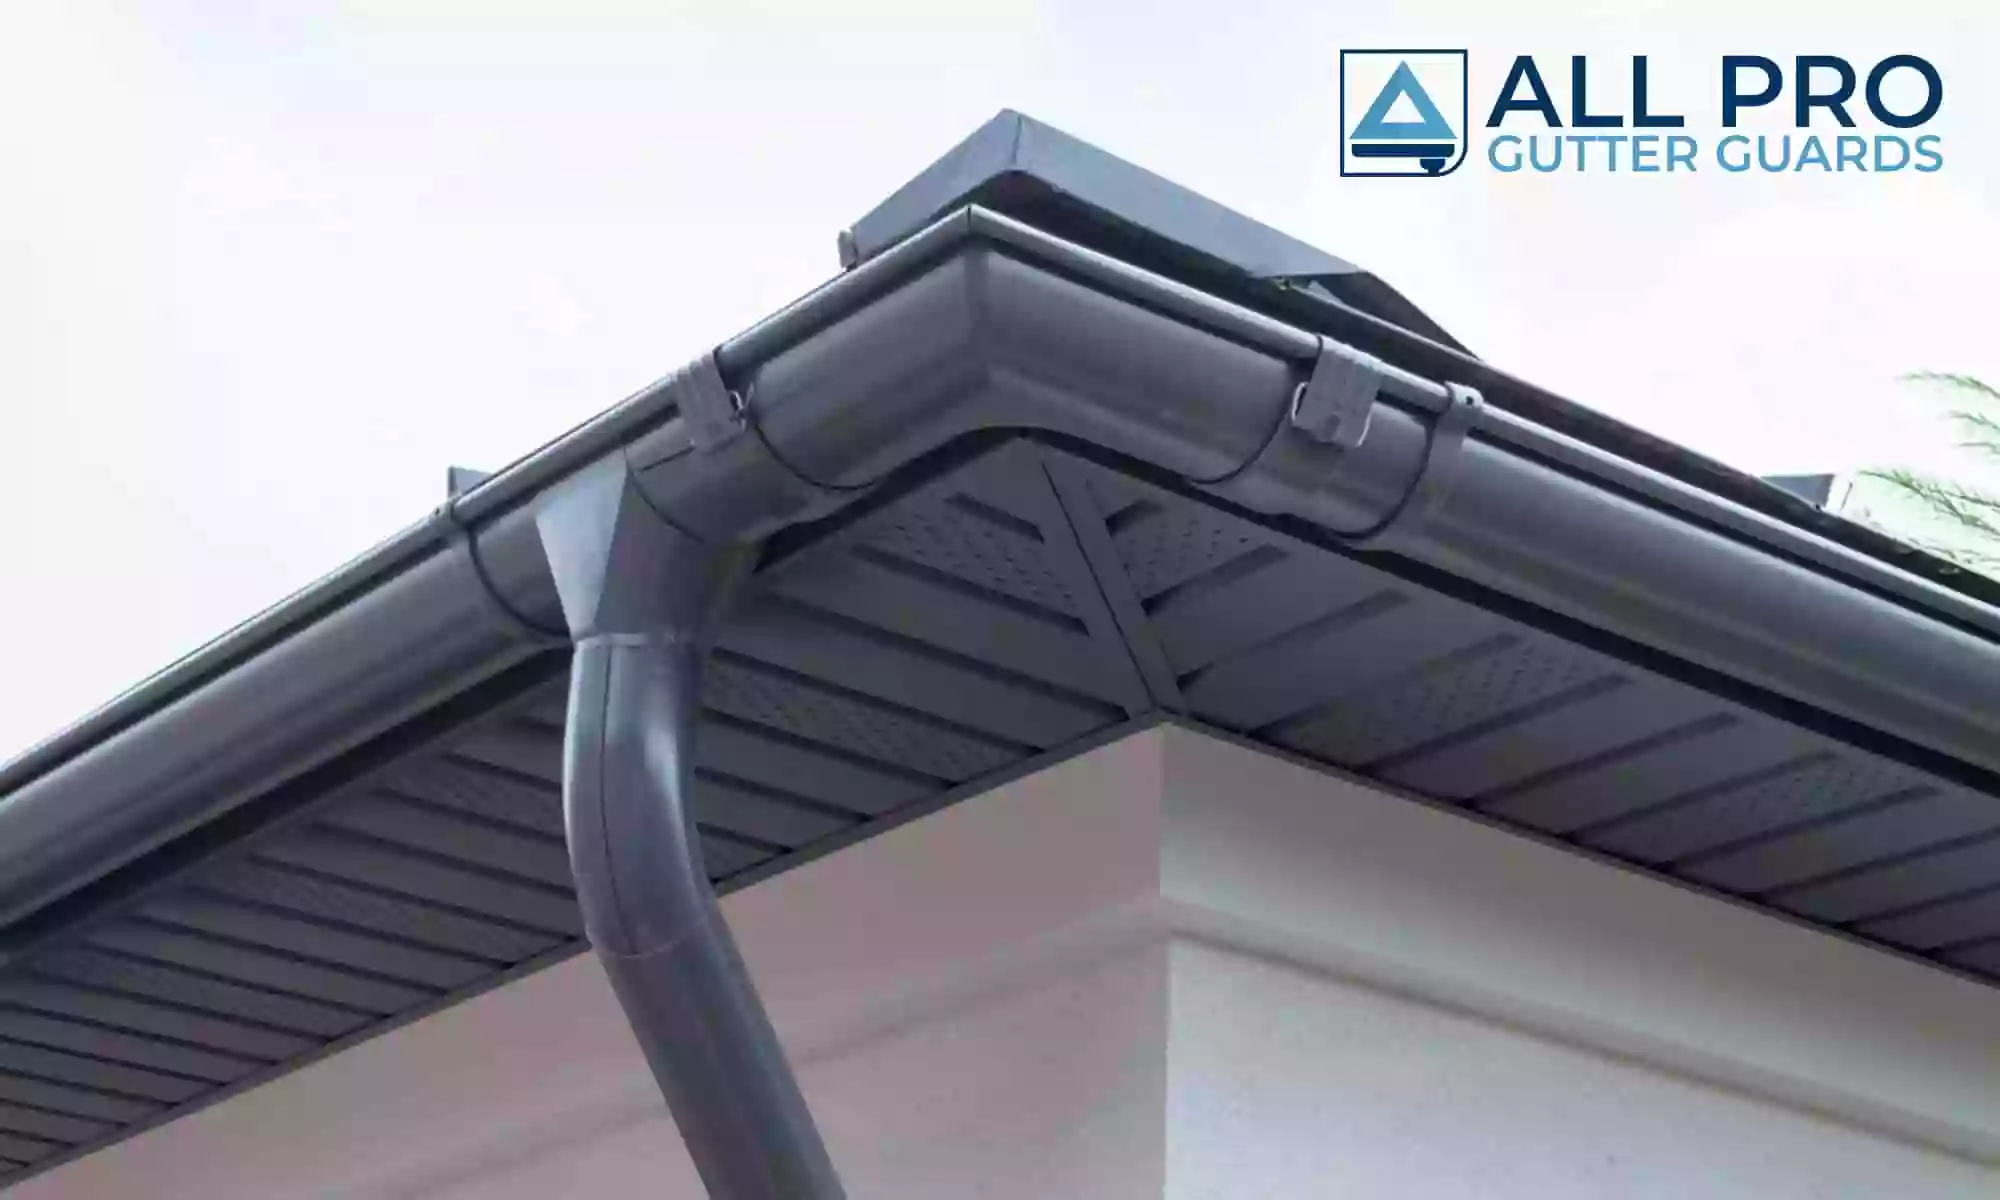 All Pro Gutter Guards